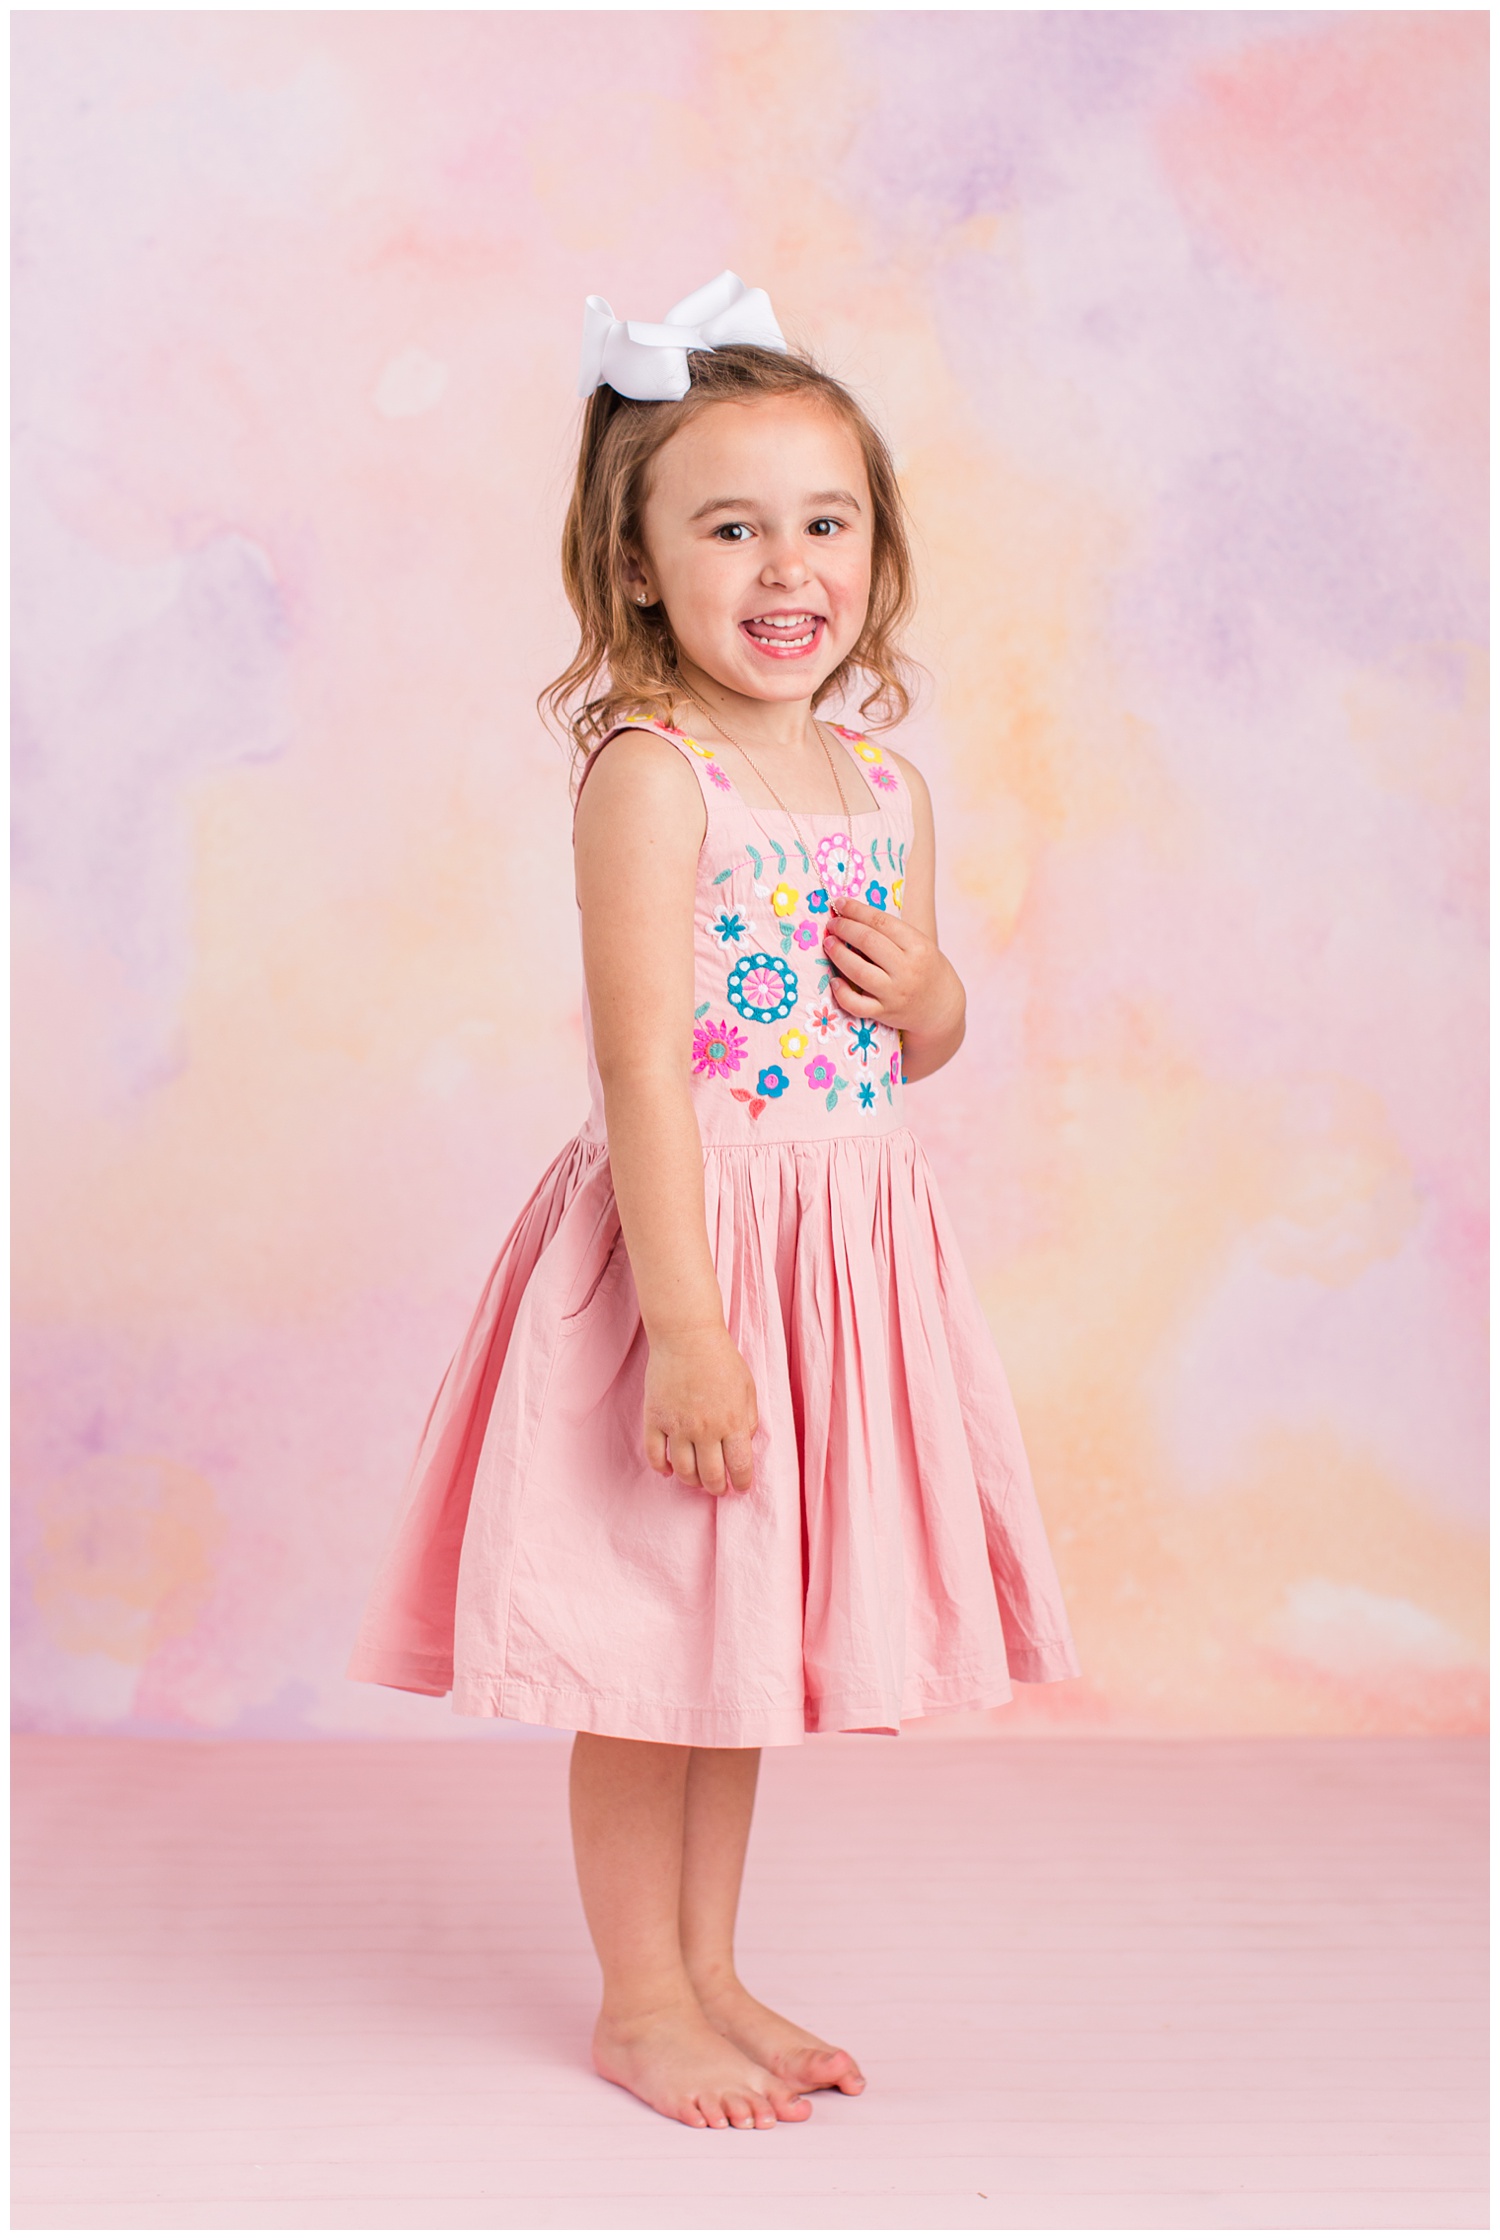 Four year old Sadie standing and smiling wearing a pink dress with floral embroidery on the bodice. 